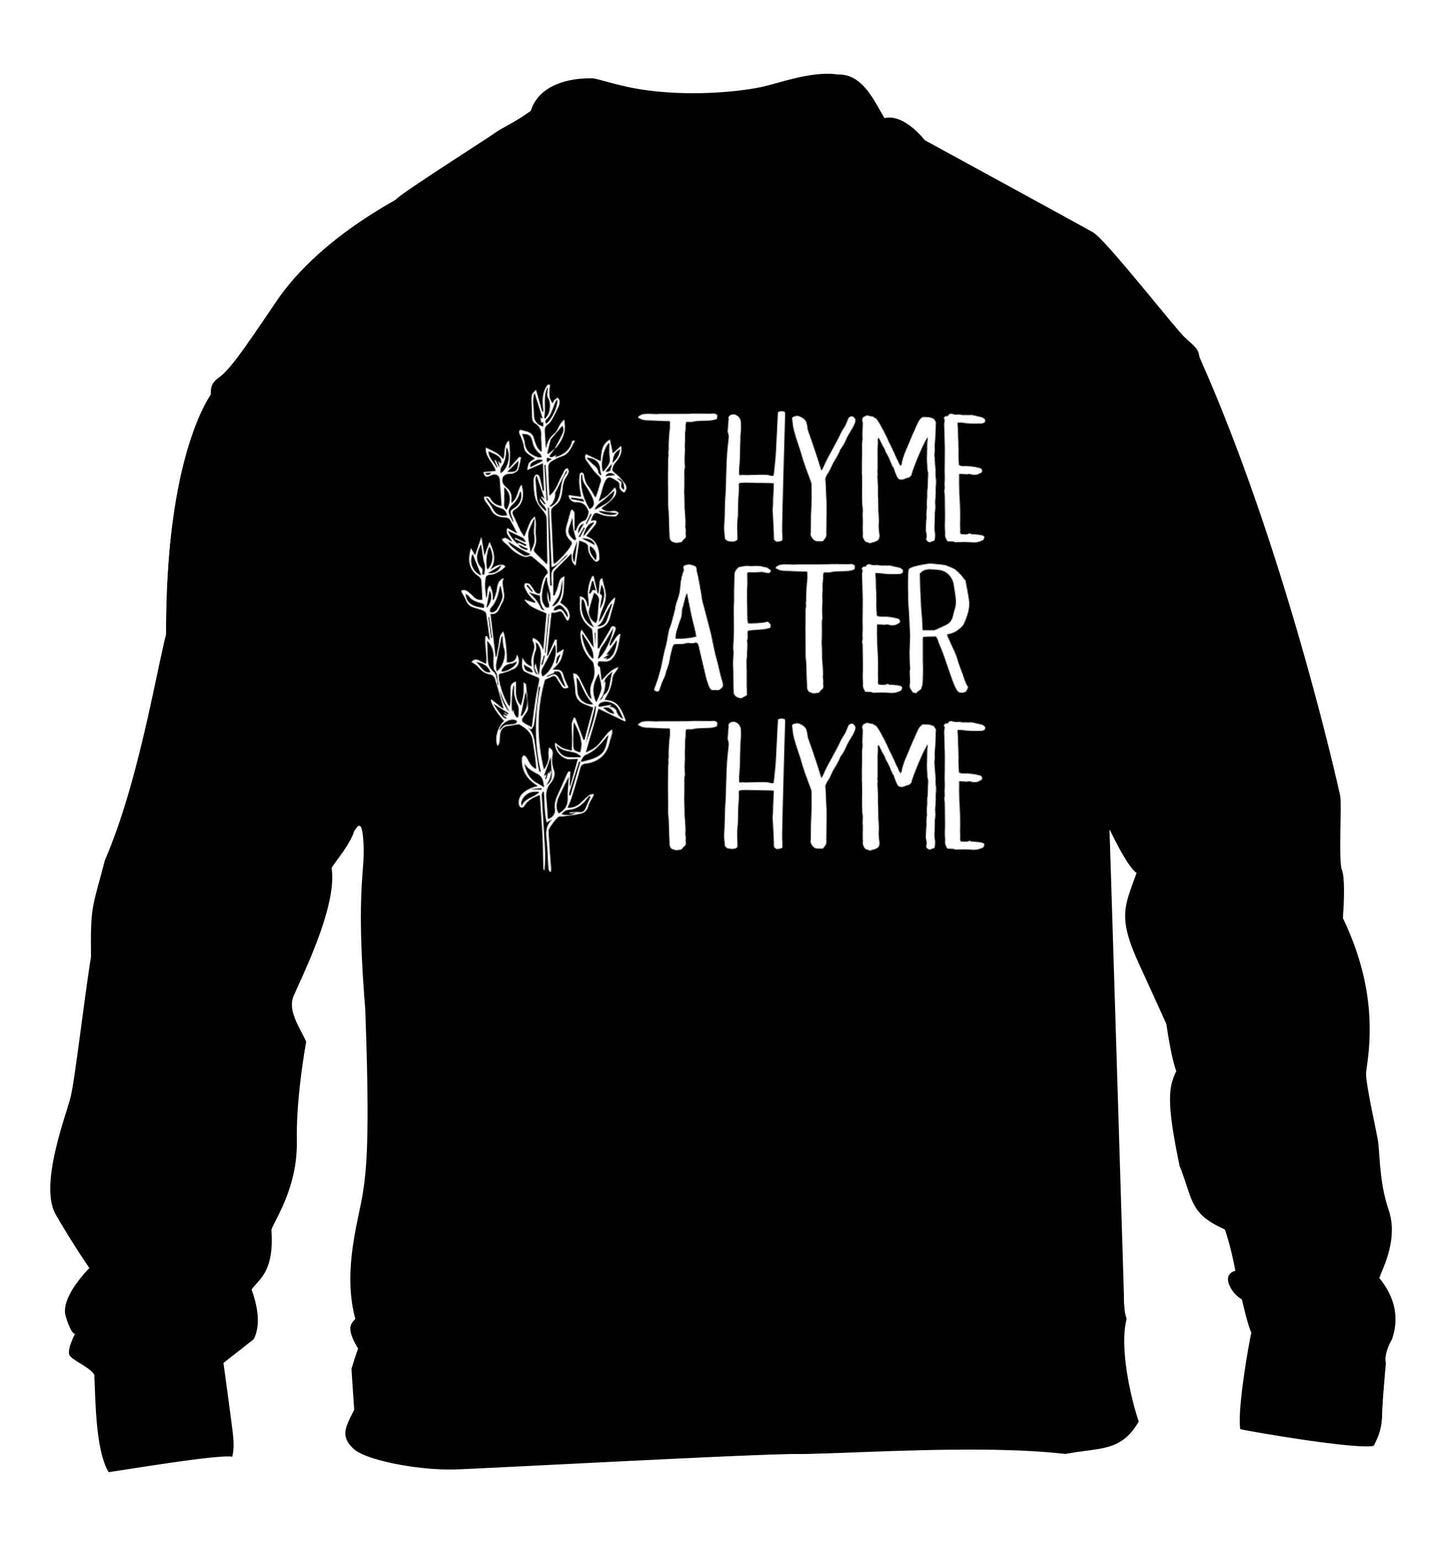 Thyme after thyme children's black sweater 12-13 Years